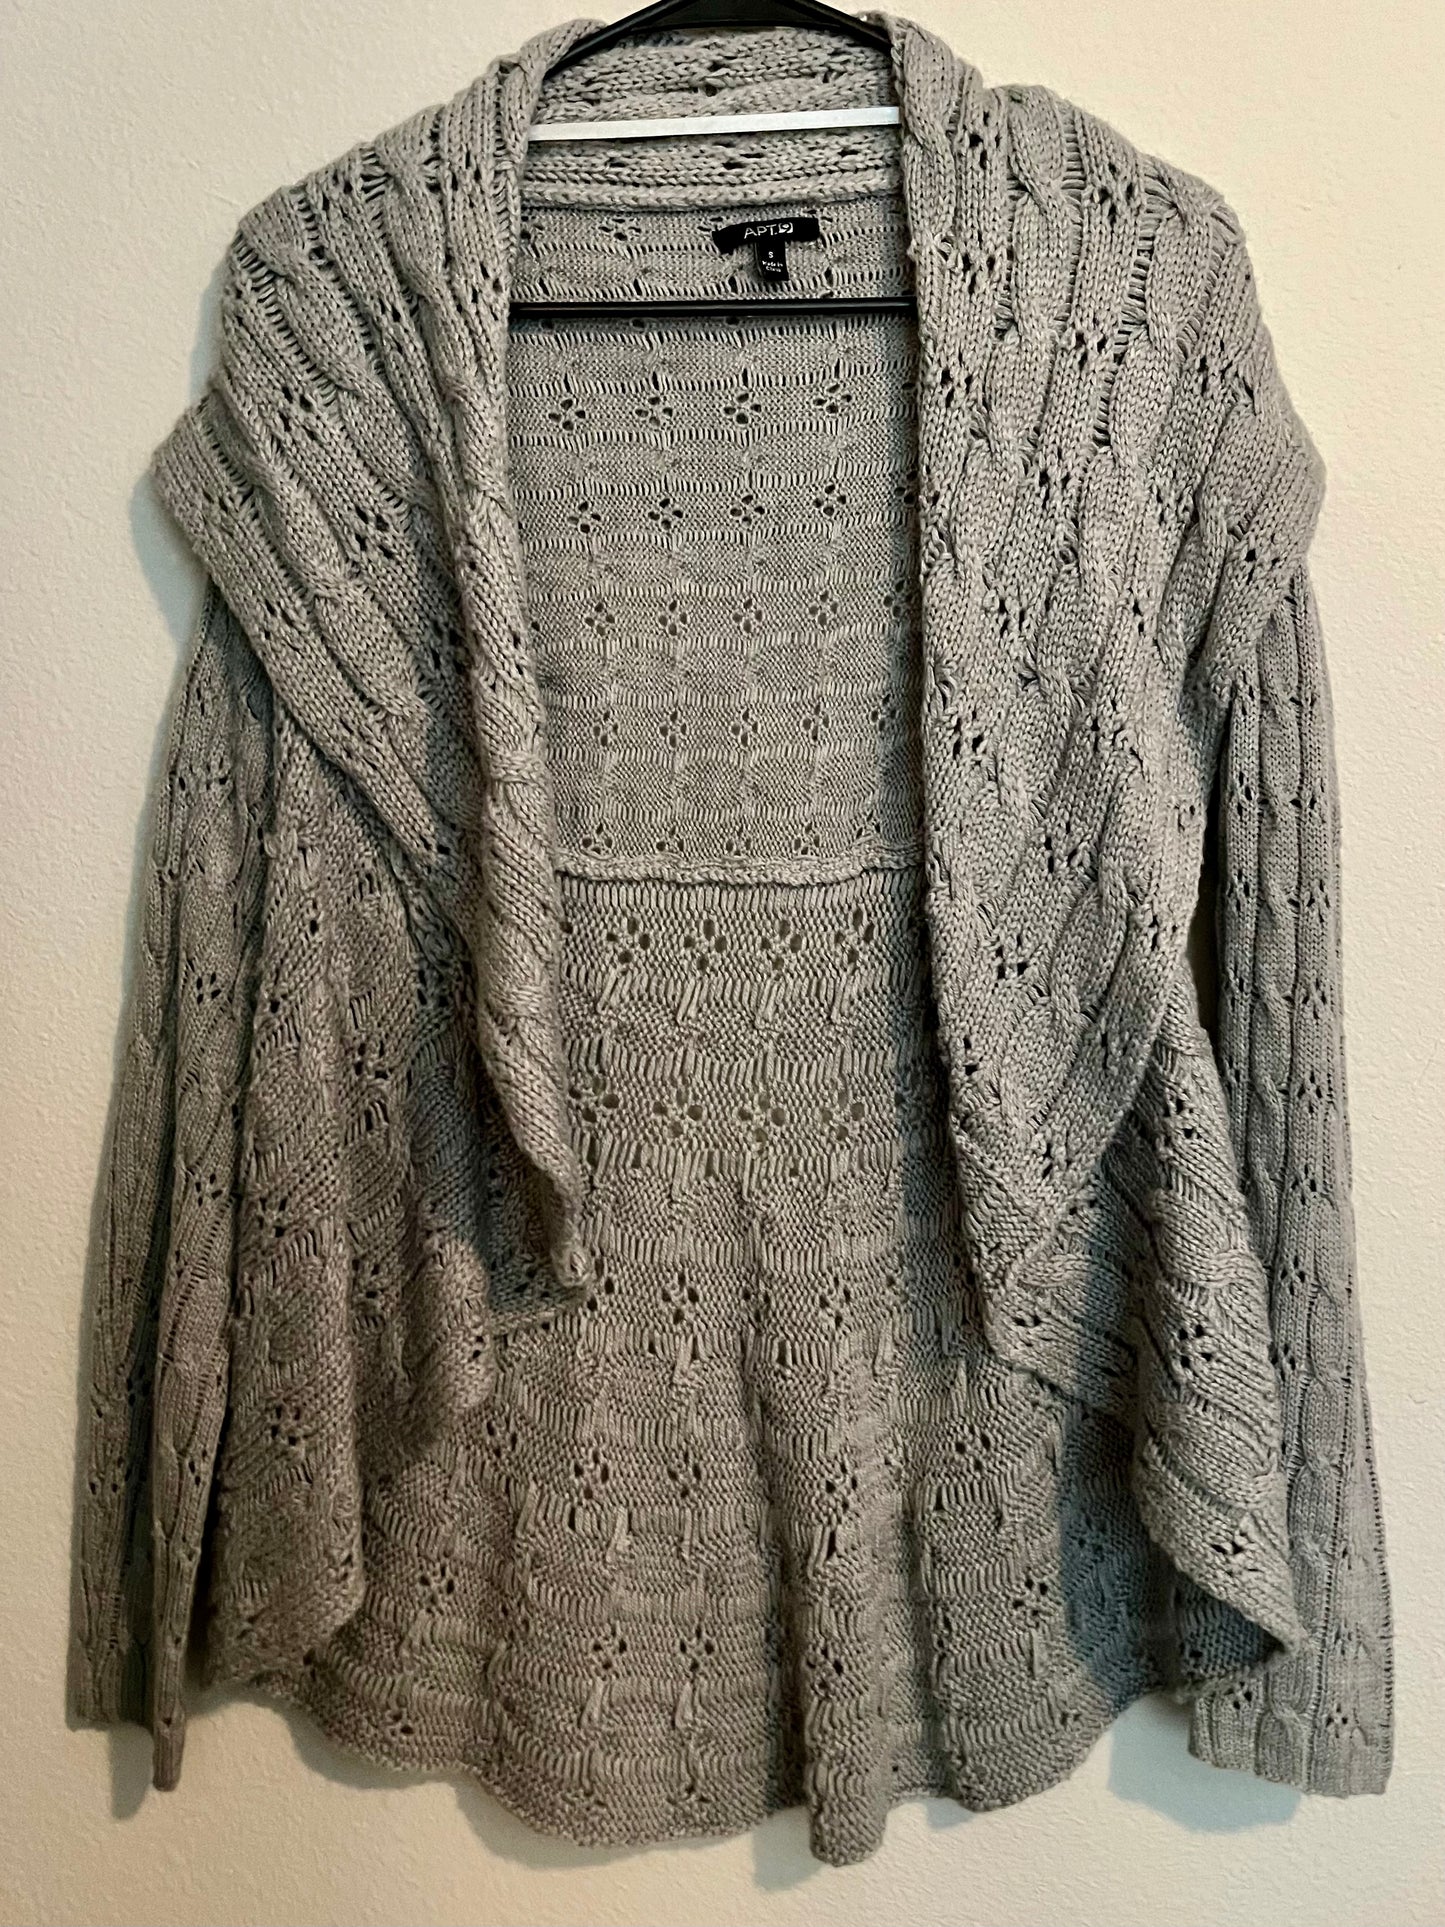 Apt 9 Lace Circle Sweater, Size Small - Tales from the Tangle